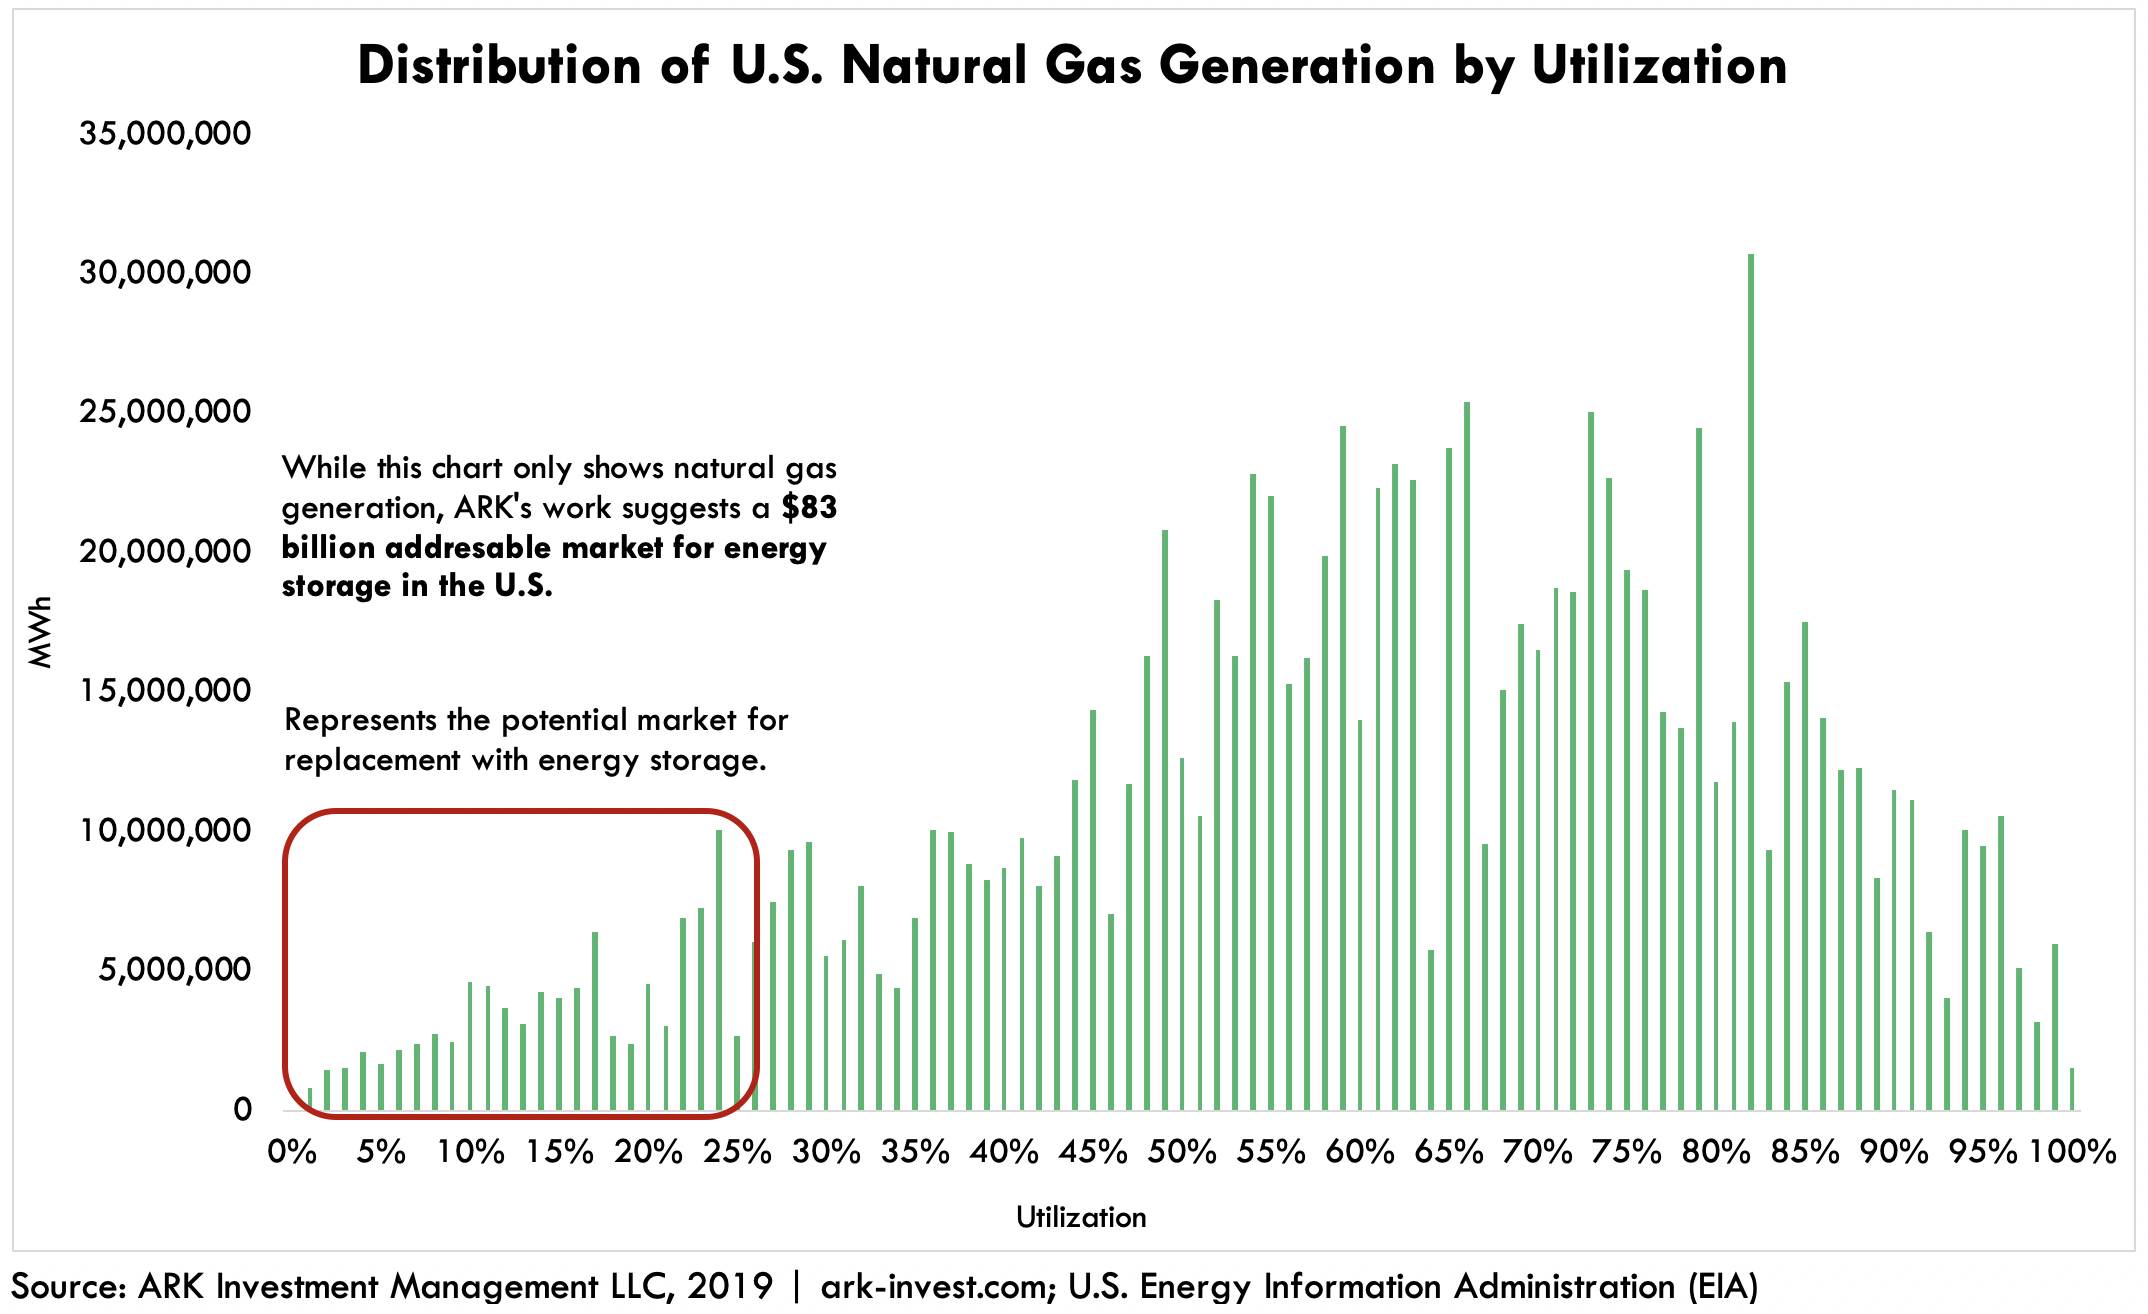 ARK Utility Energy Storage Distribution of US Natural Gas